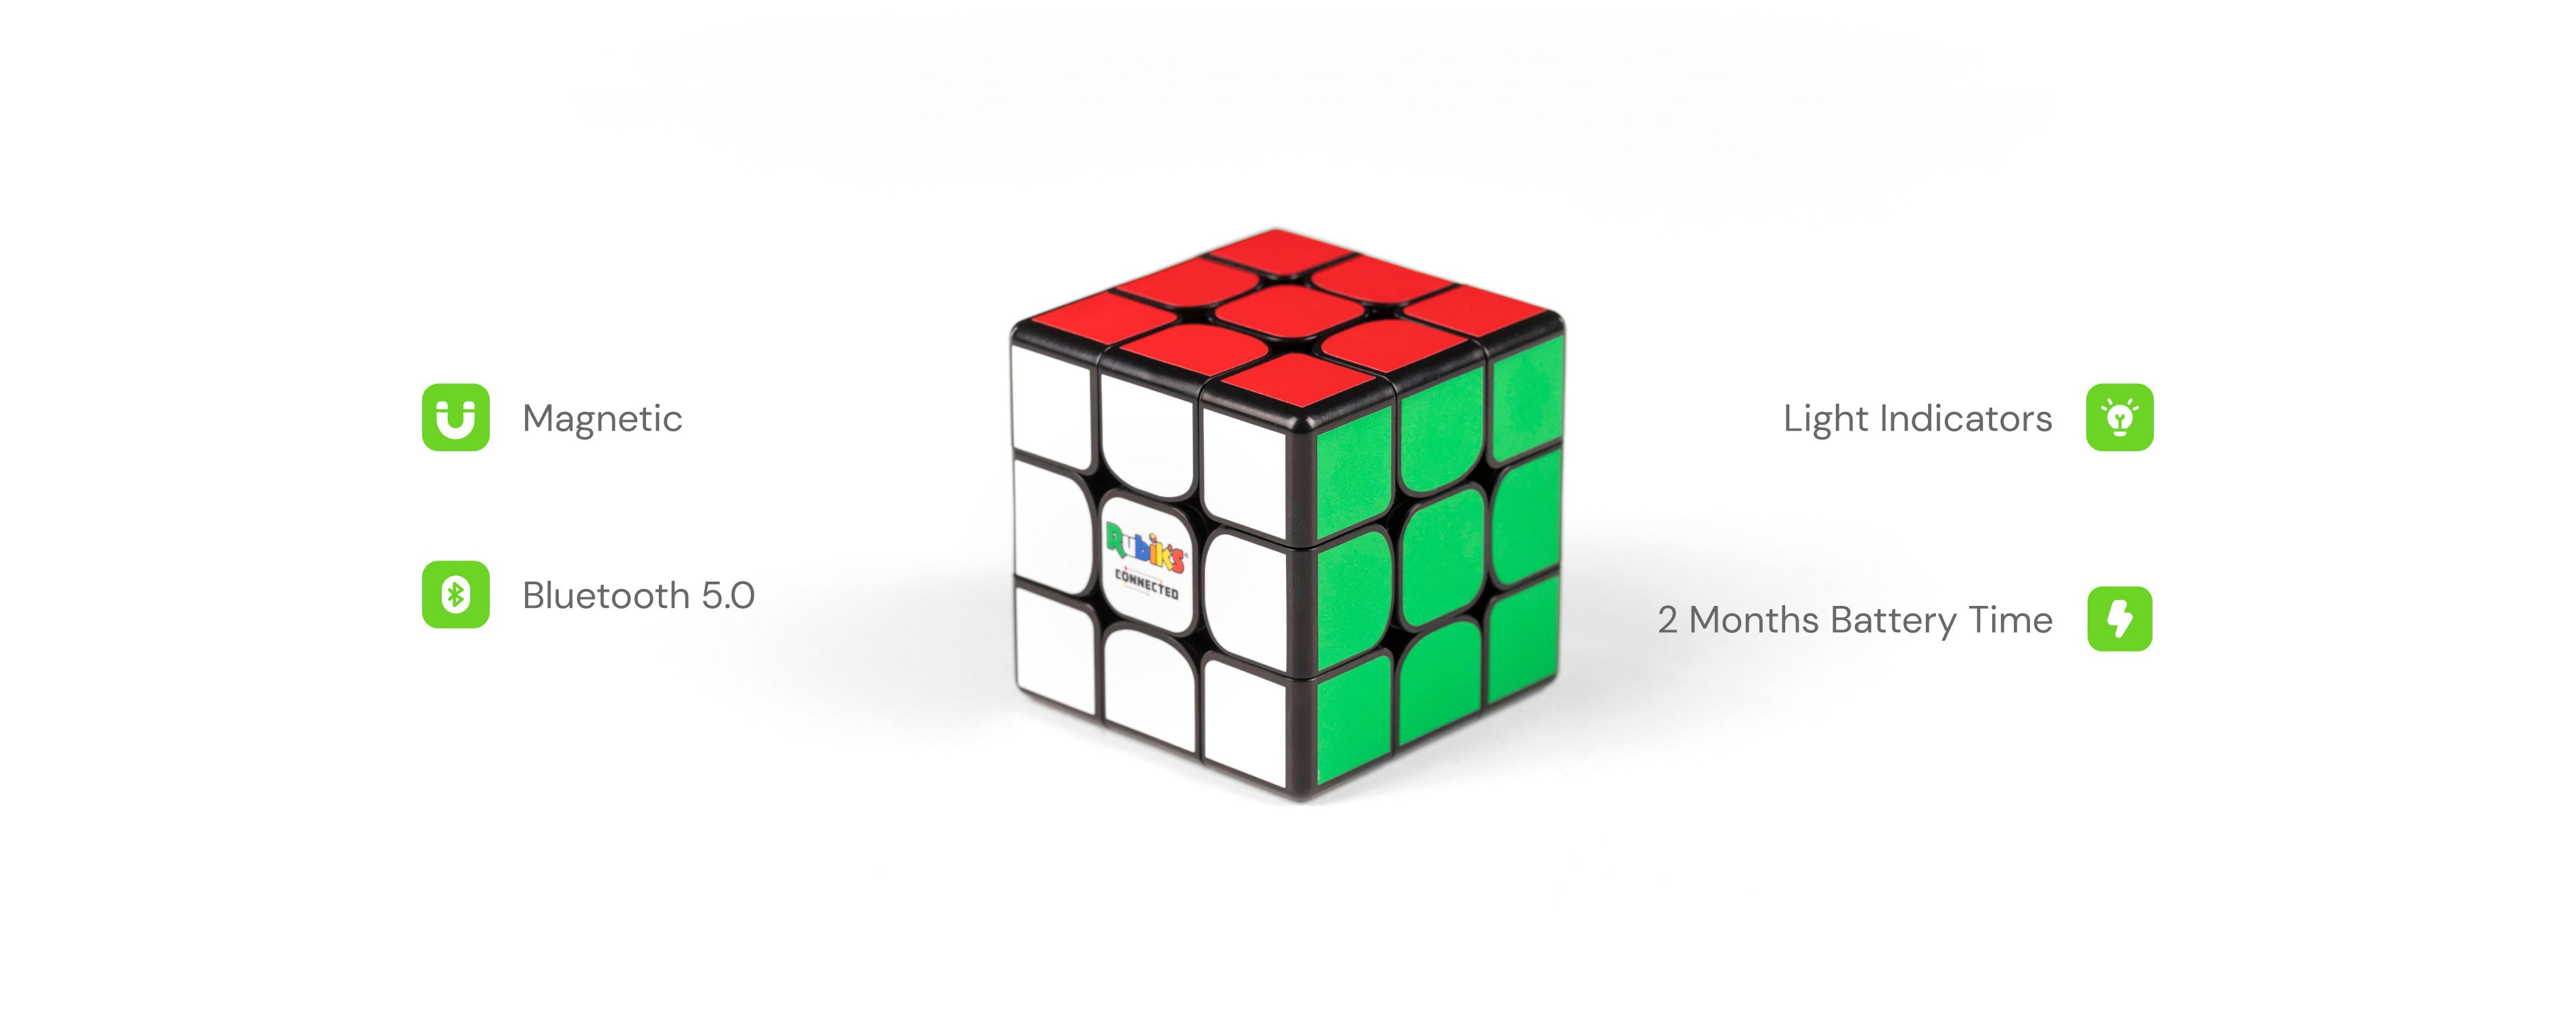 Rubik’s Connected features